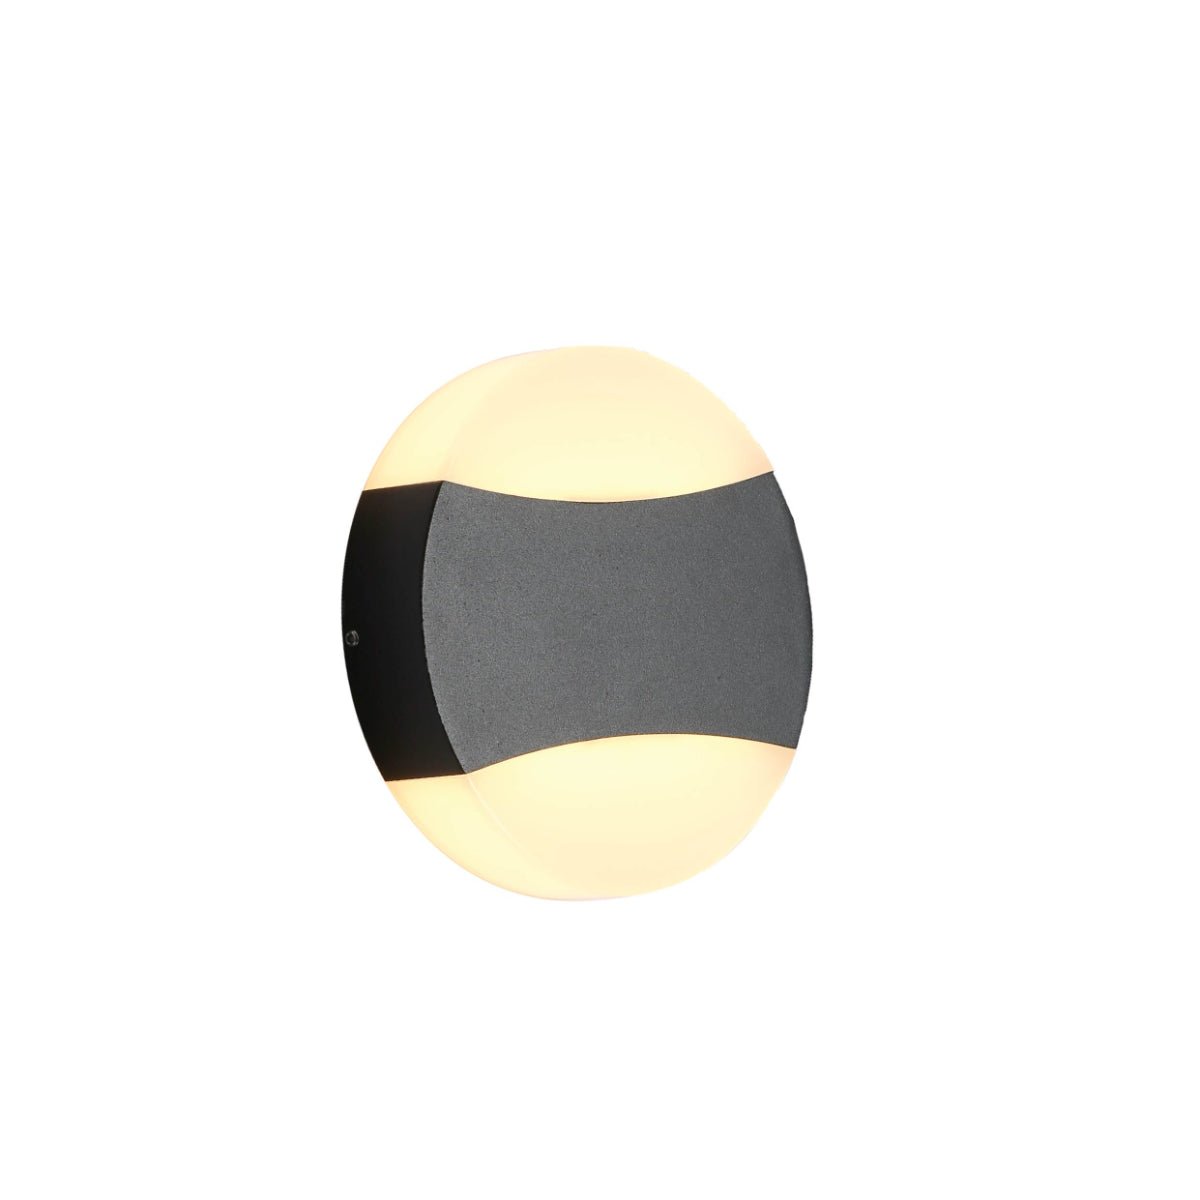 Main image of Black Opal Round Up Down Outdoor Modern LED Wall Light | TEKLED 182-03378